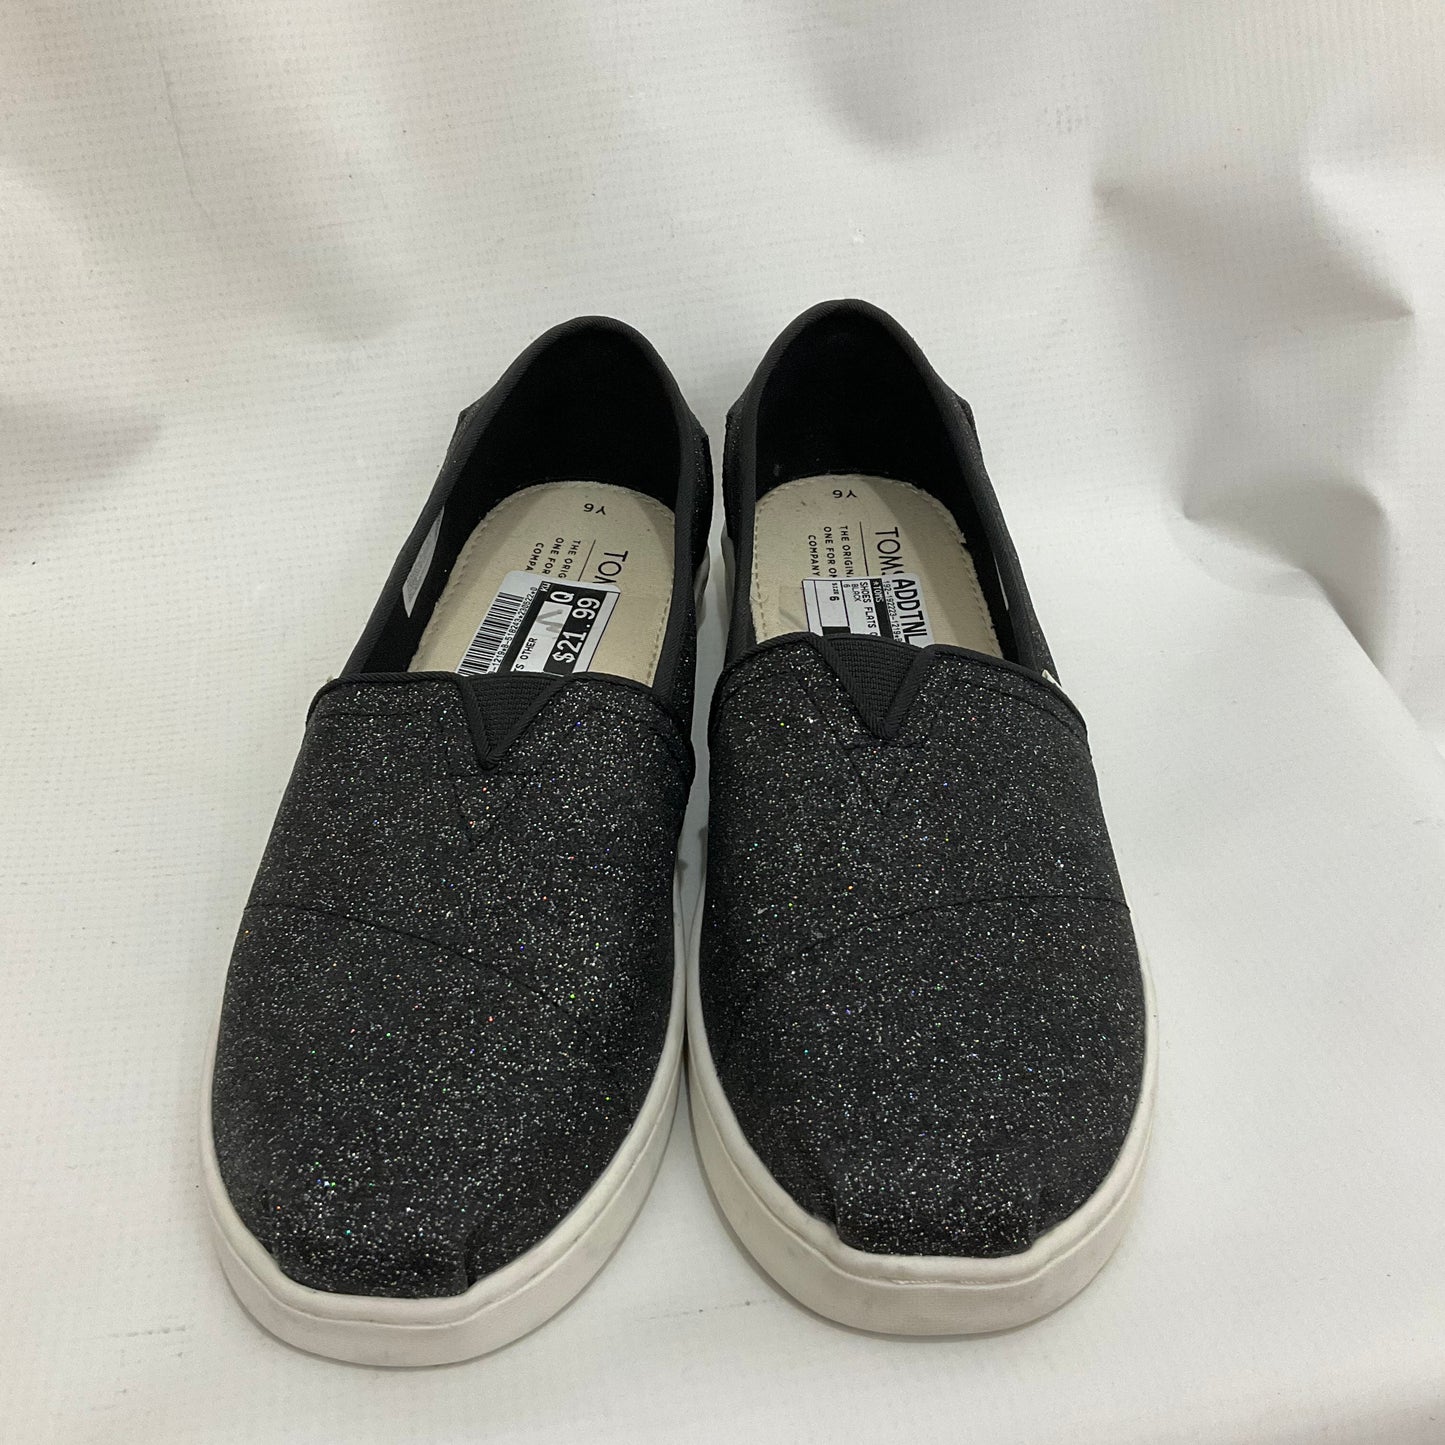 Shoes Flats Other By Toms  Size: 6